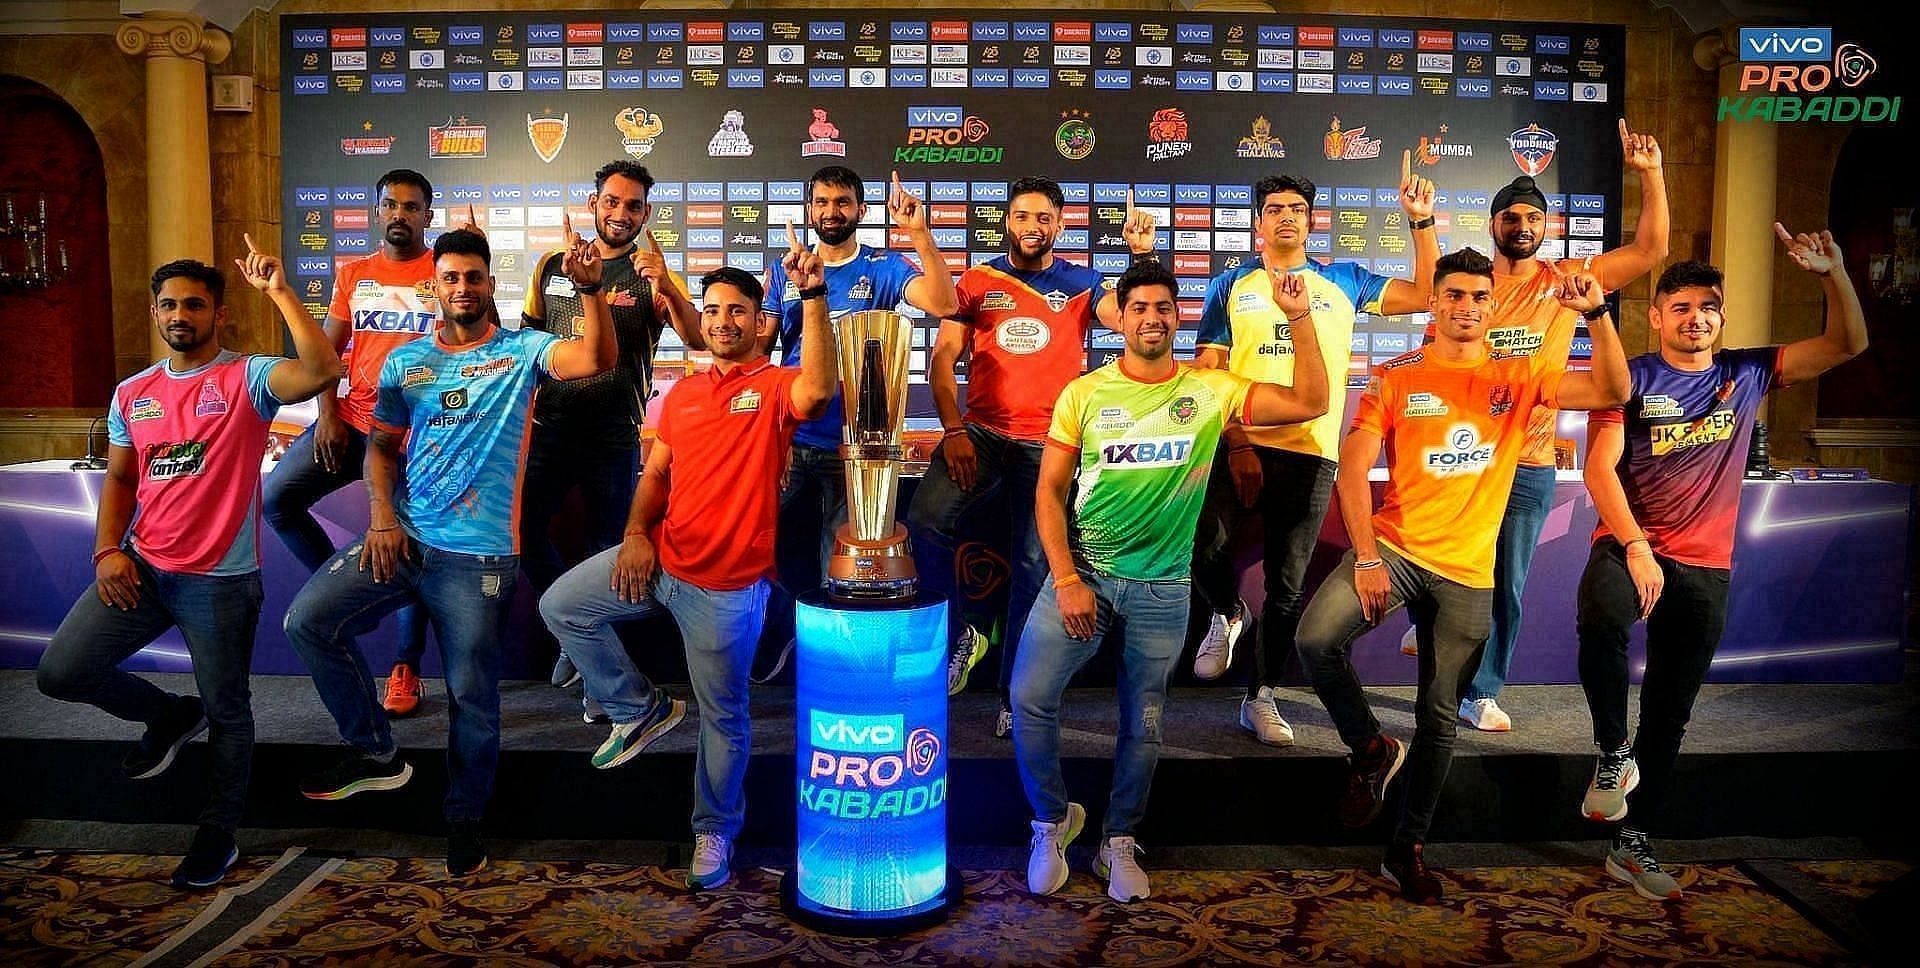 Three matches will happen in PKL 2022 today (Image: PKL)